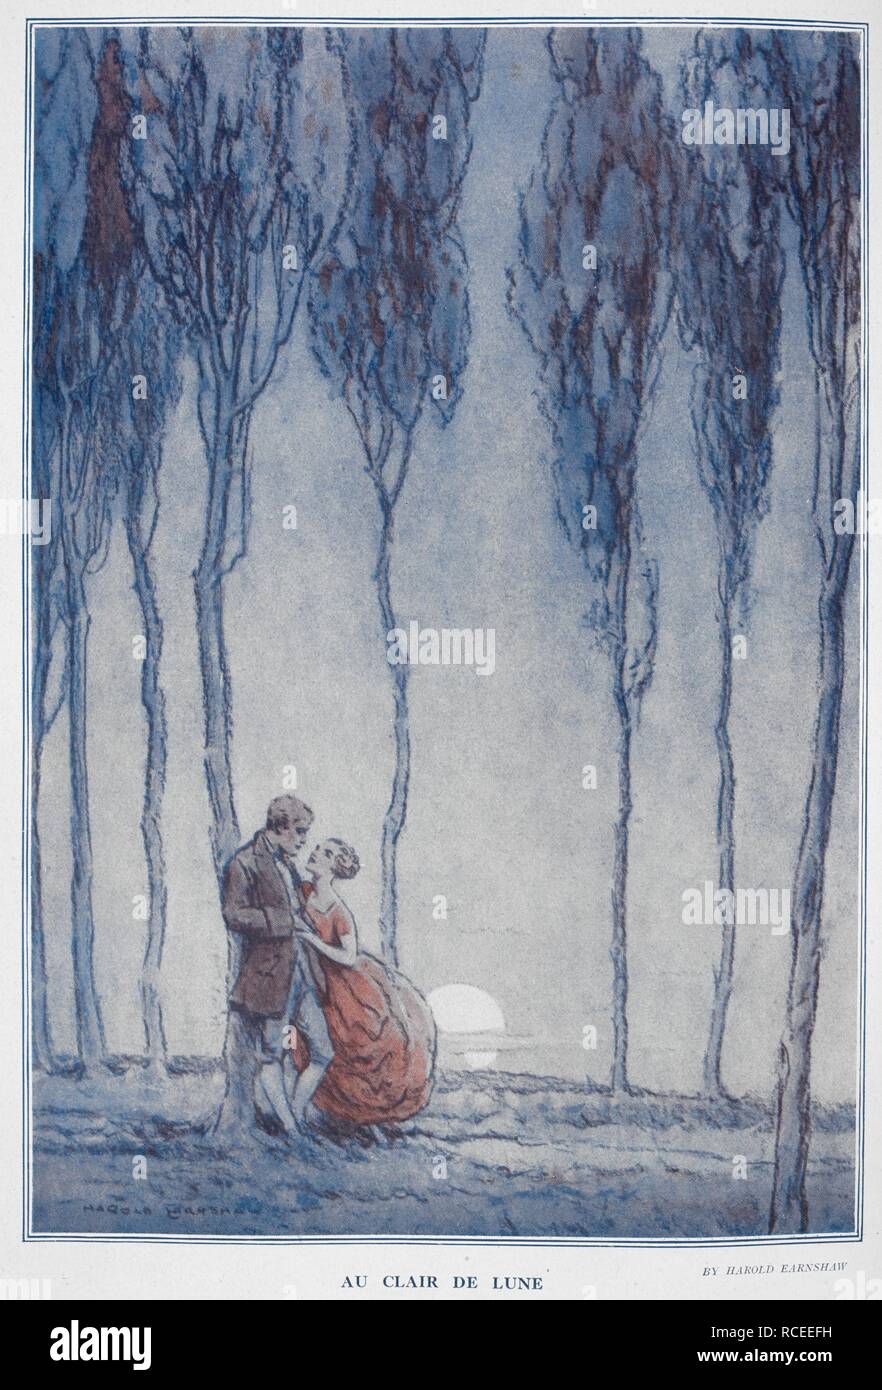 'Au clair de lune'. A couple together in the moonlight,  surrounded by trees. The bystander. London : The Bystander, 1903-1940. Source: ZC.9.d.560, p.318. Language: French. Stock Photo